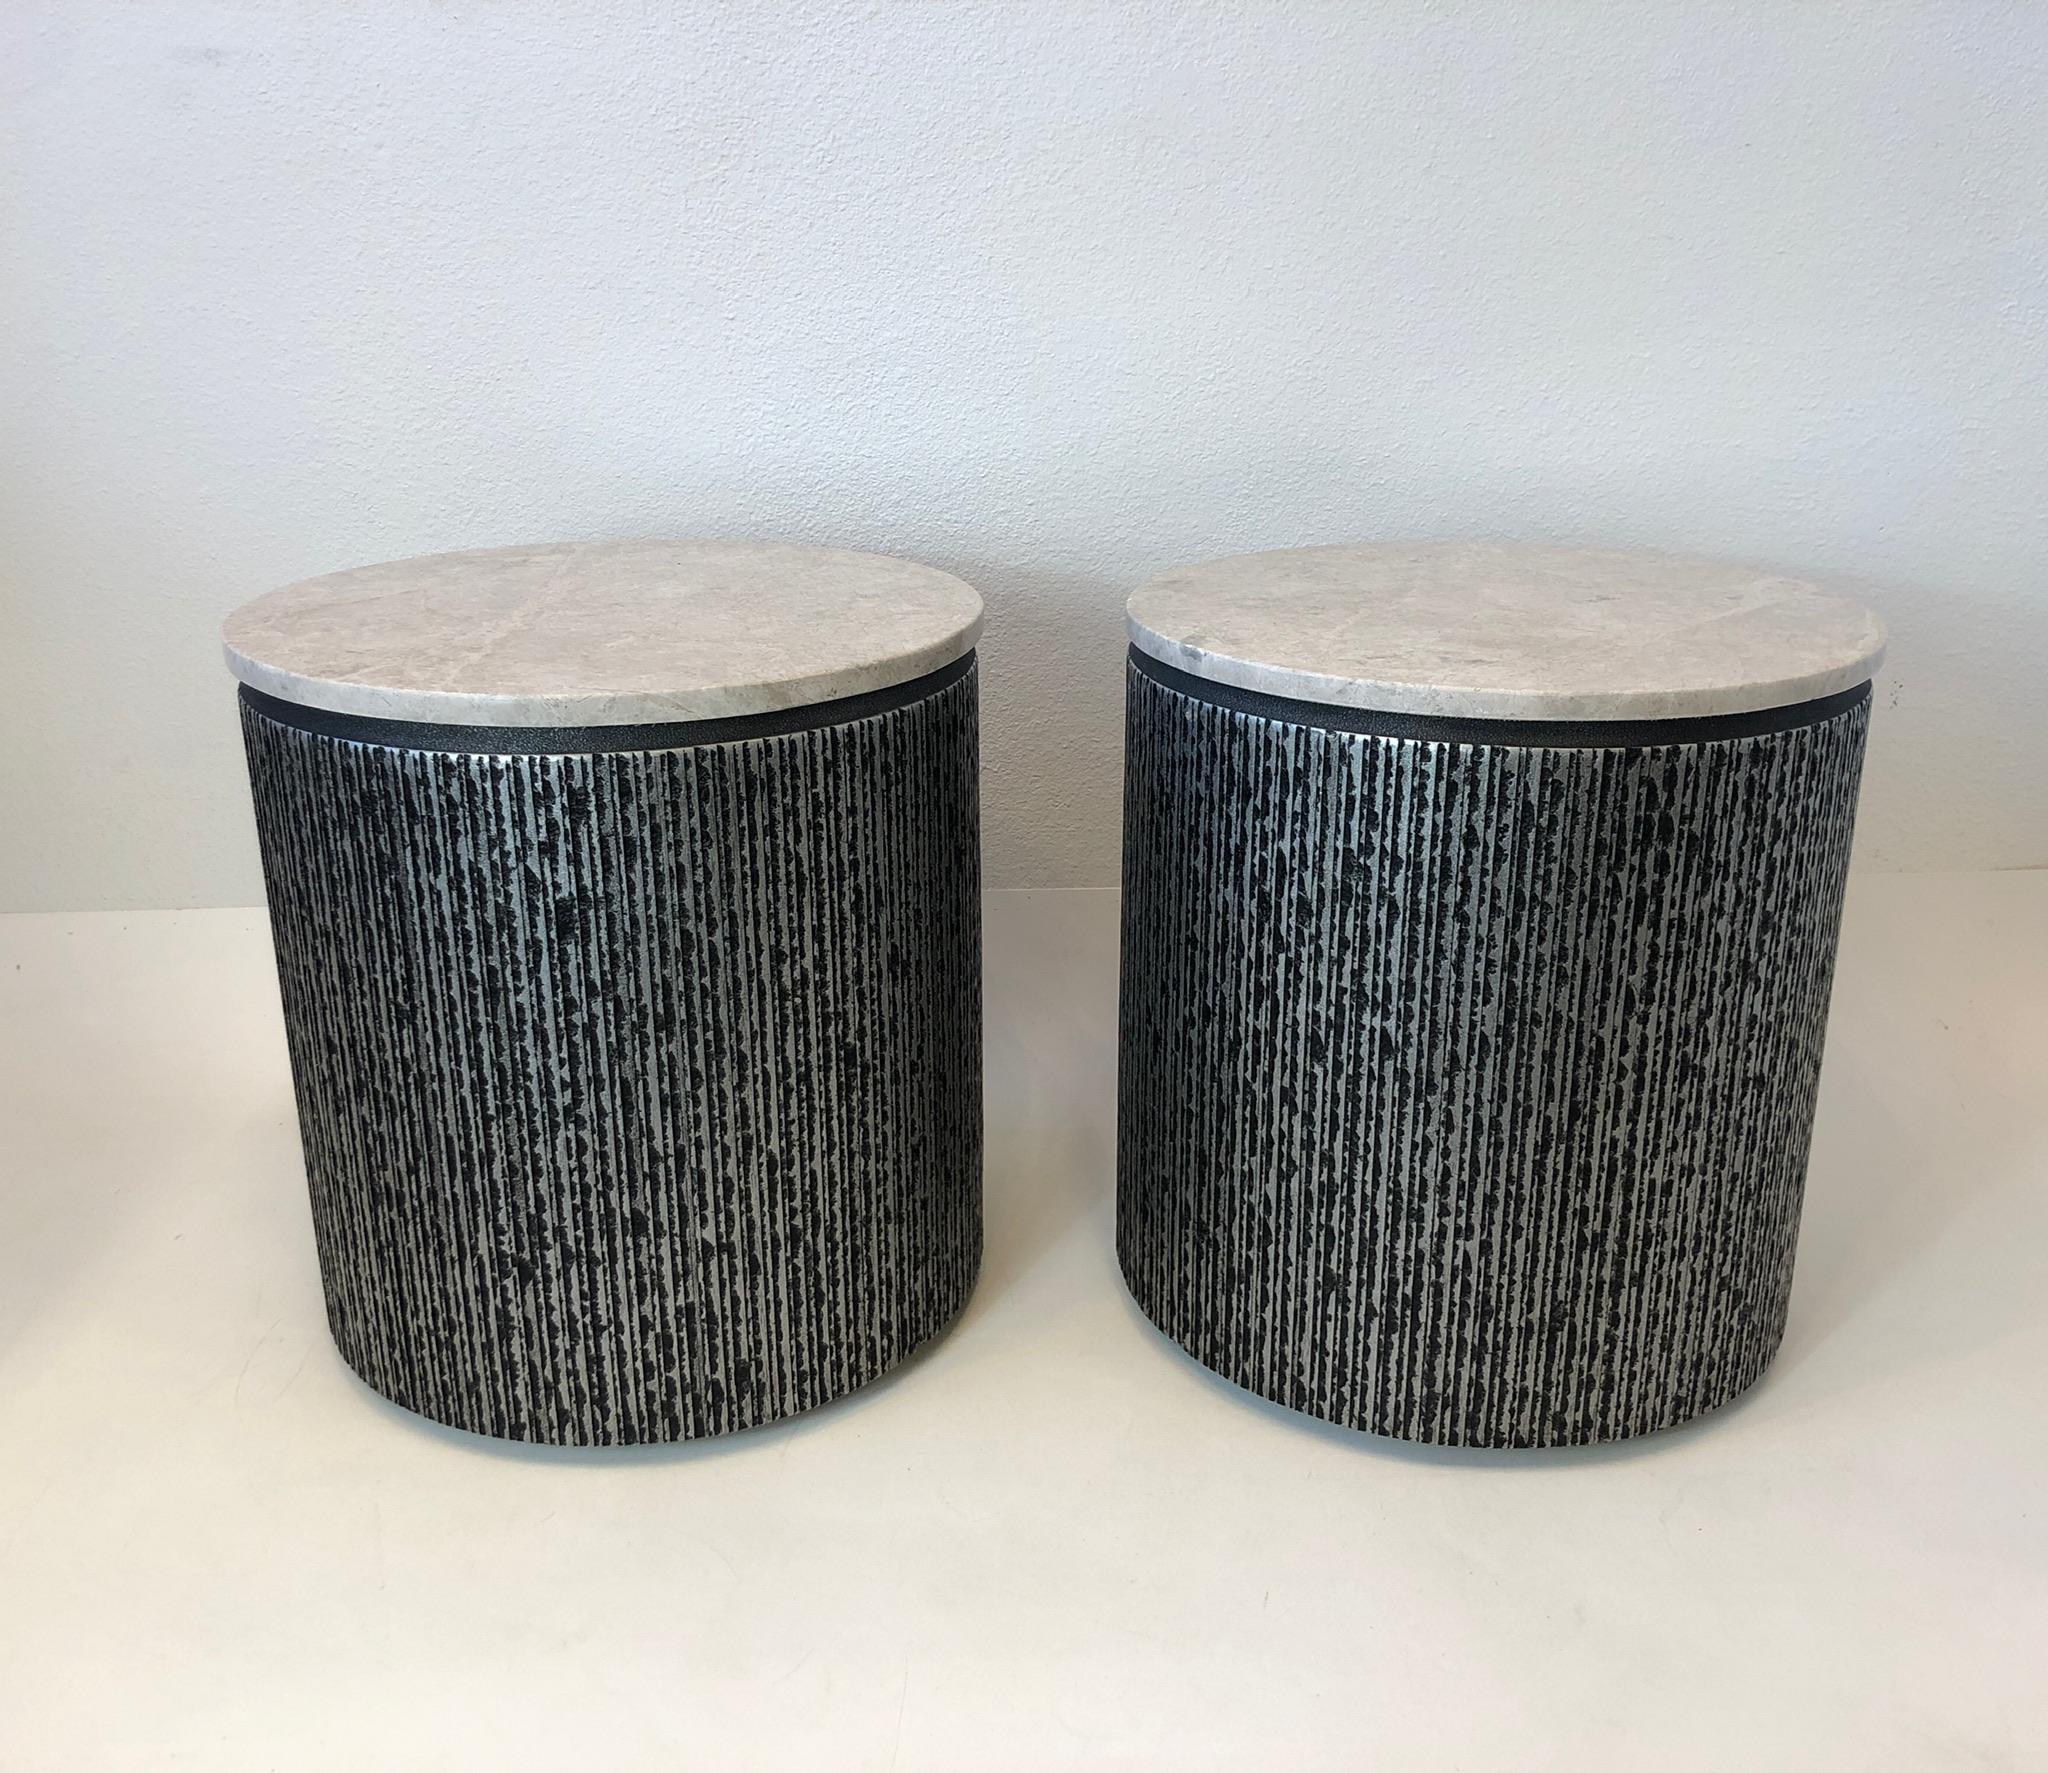 1970’s Brutalist pair of drum side tables designed by Form and Surfaces for Steve Chase. 
This came out of a Steve Chase estate in Palm Desert CA. 
The tops can be remove for storage. 
Constructed of fiberglass with a silver and black finish and